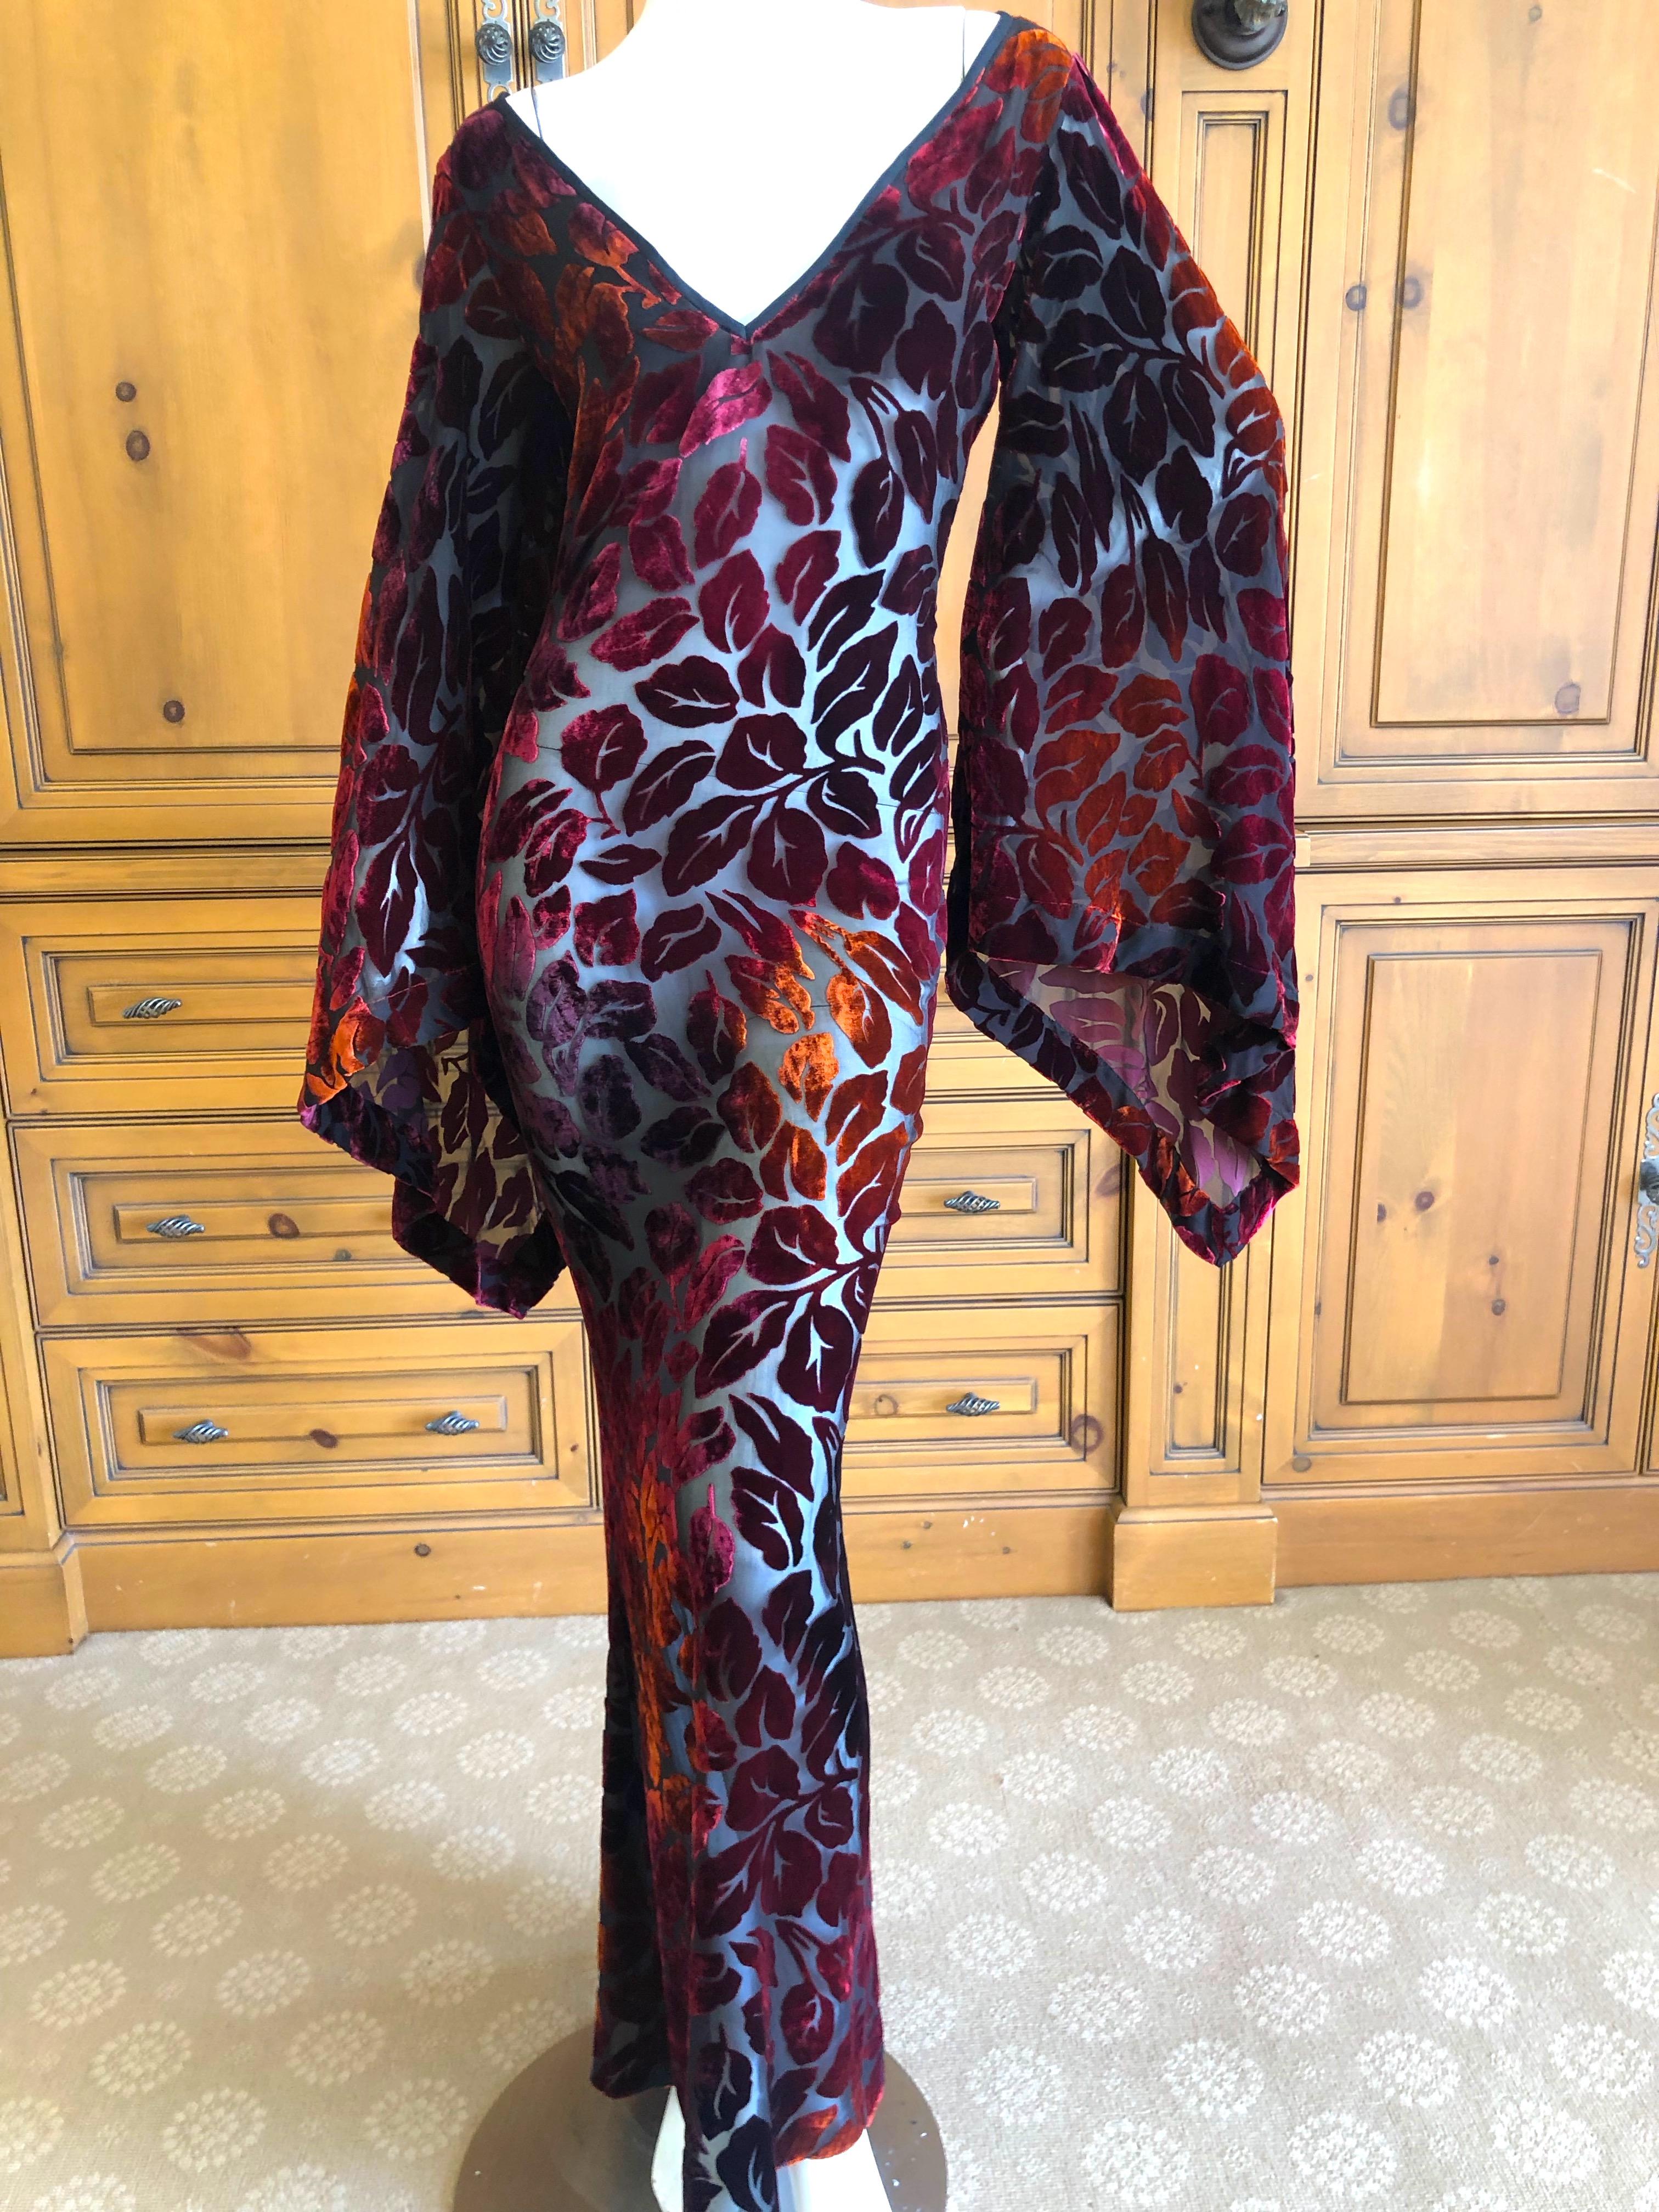 Yves Saint Laurent Rive Gauche Vintage 70's Sheer Iridescent Devore Velvet Dress.
This is so beautiful, sheer black with russet to orange velvet leaves.
Medieval  style pointed sleeves and slight pointed train.
The measurements are quite small
Size